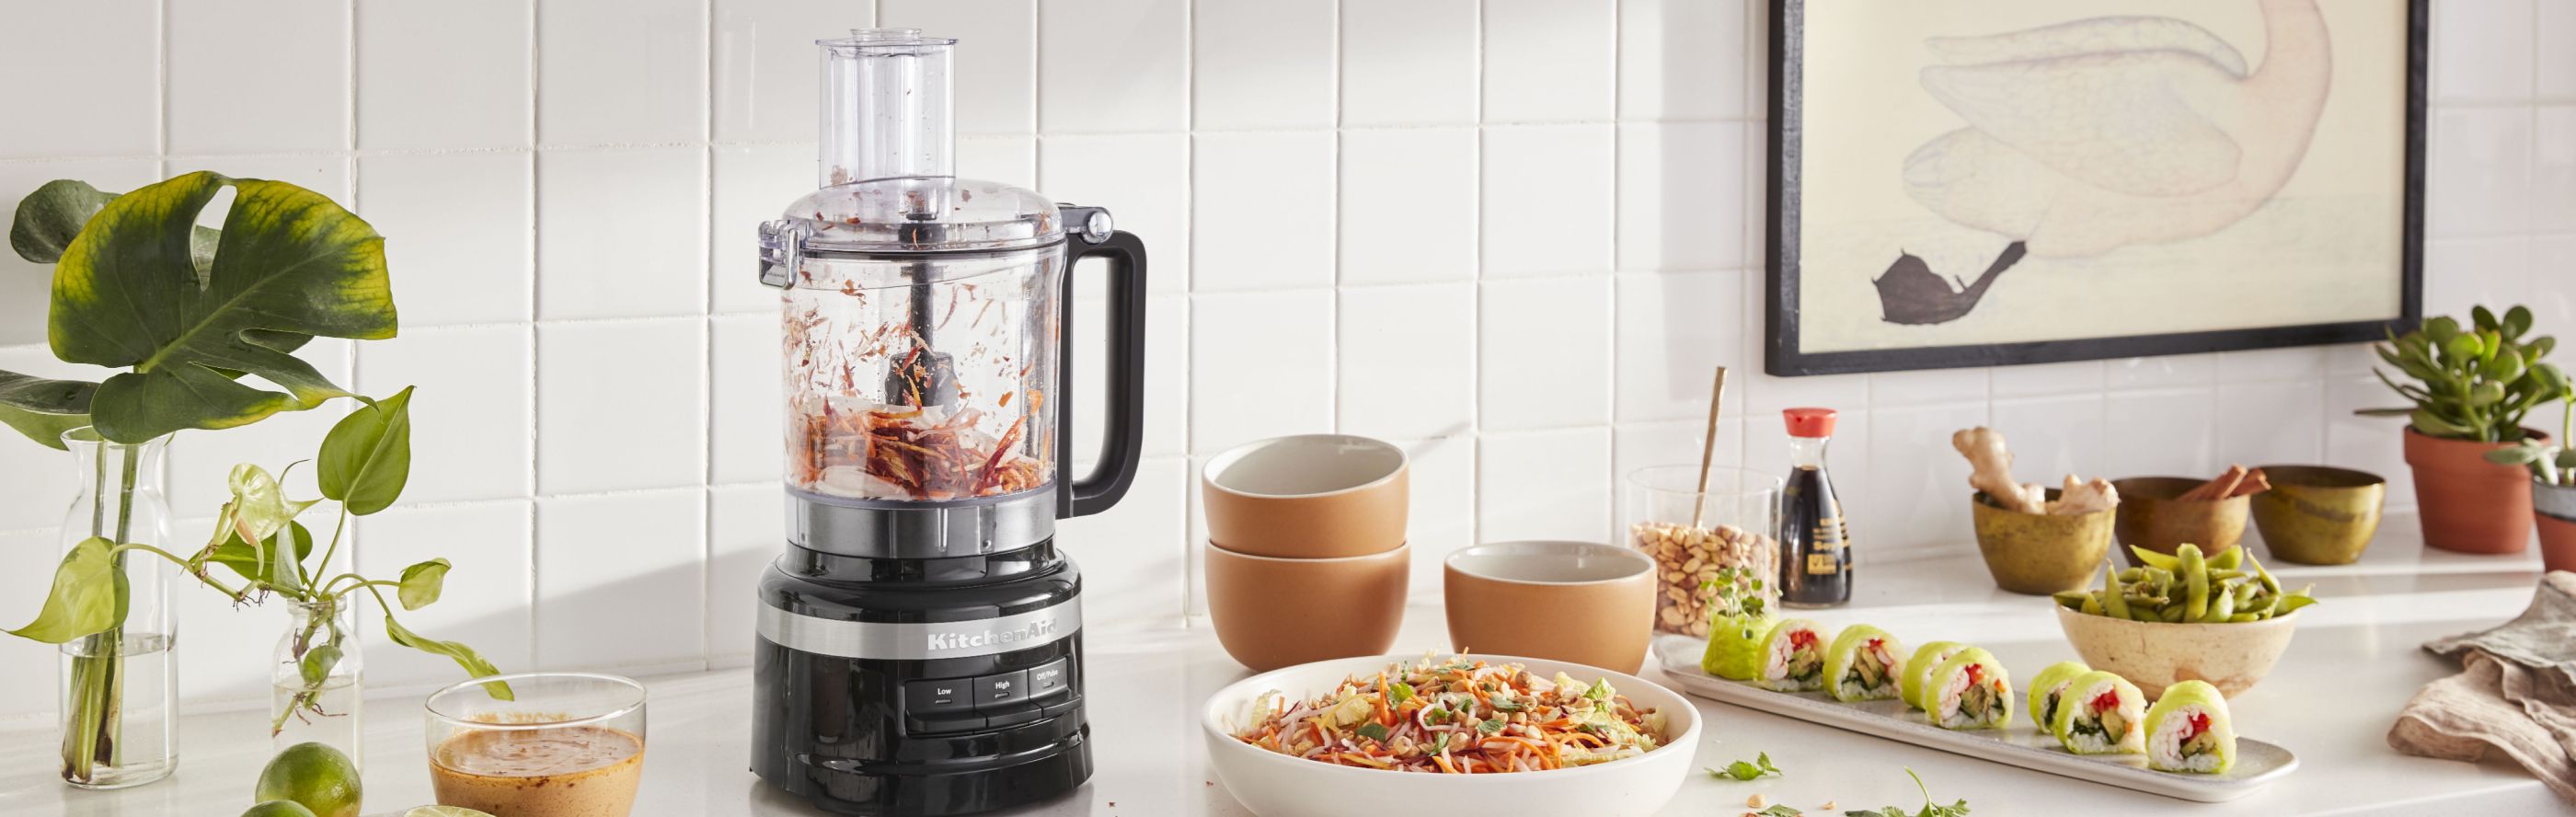 KitchenAid® food processor on countertop with sushi and cole slaw